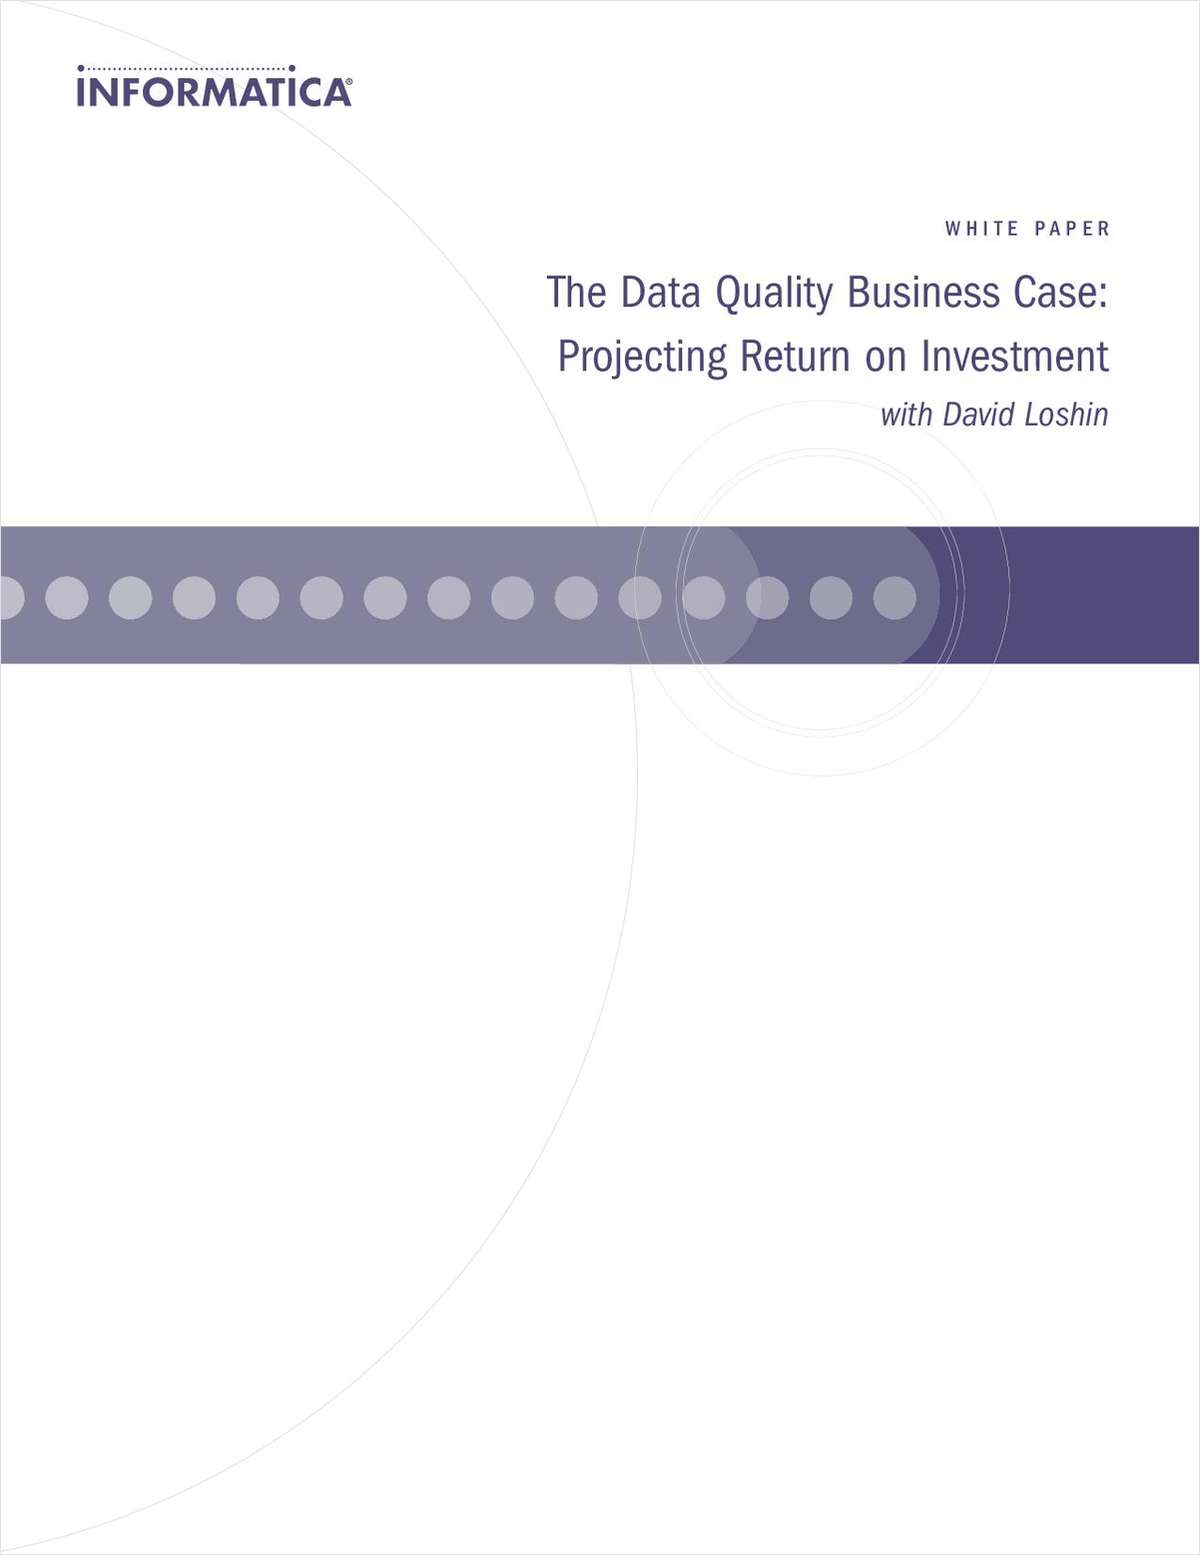 Data Quality Business Case: Projecting Return on Investment with David Loshin